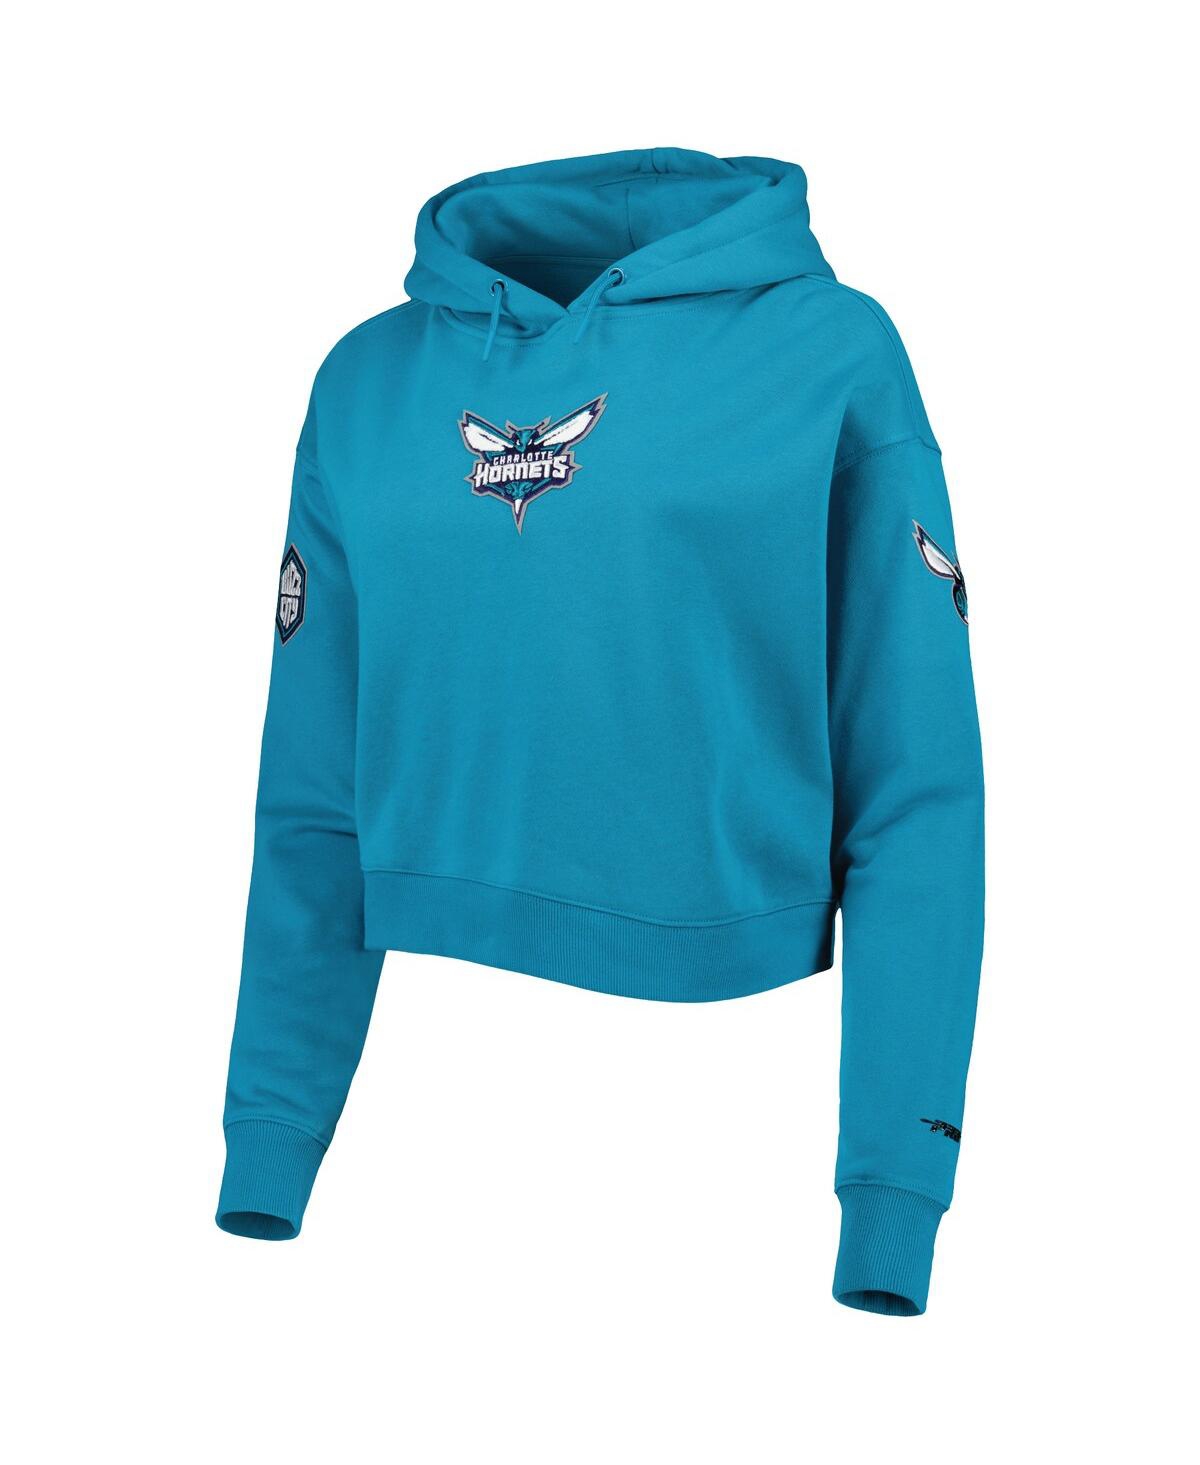 Shop Pro Standard Women's  Teal Charlotte Hornets Classic Fleece Cropped Pullover Hoodie